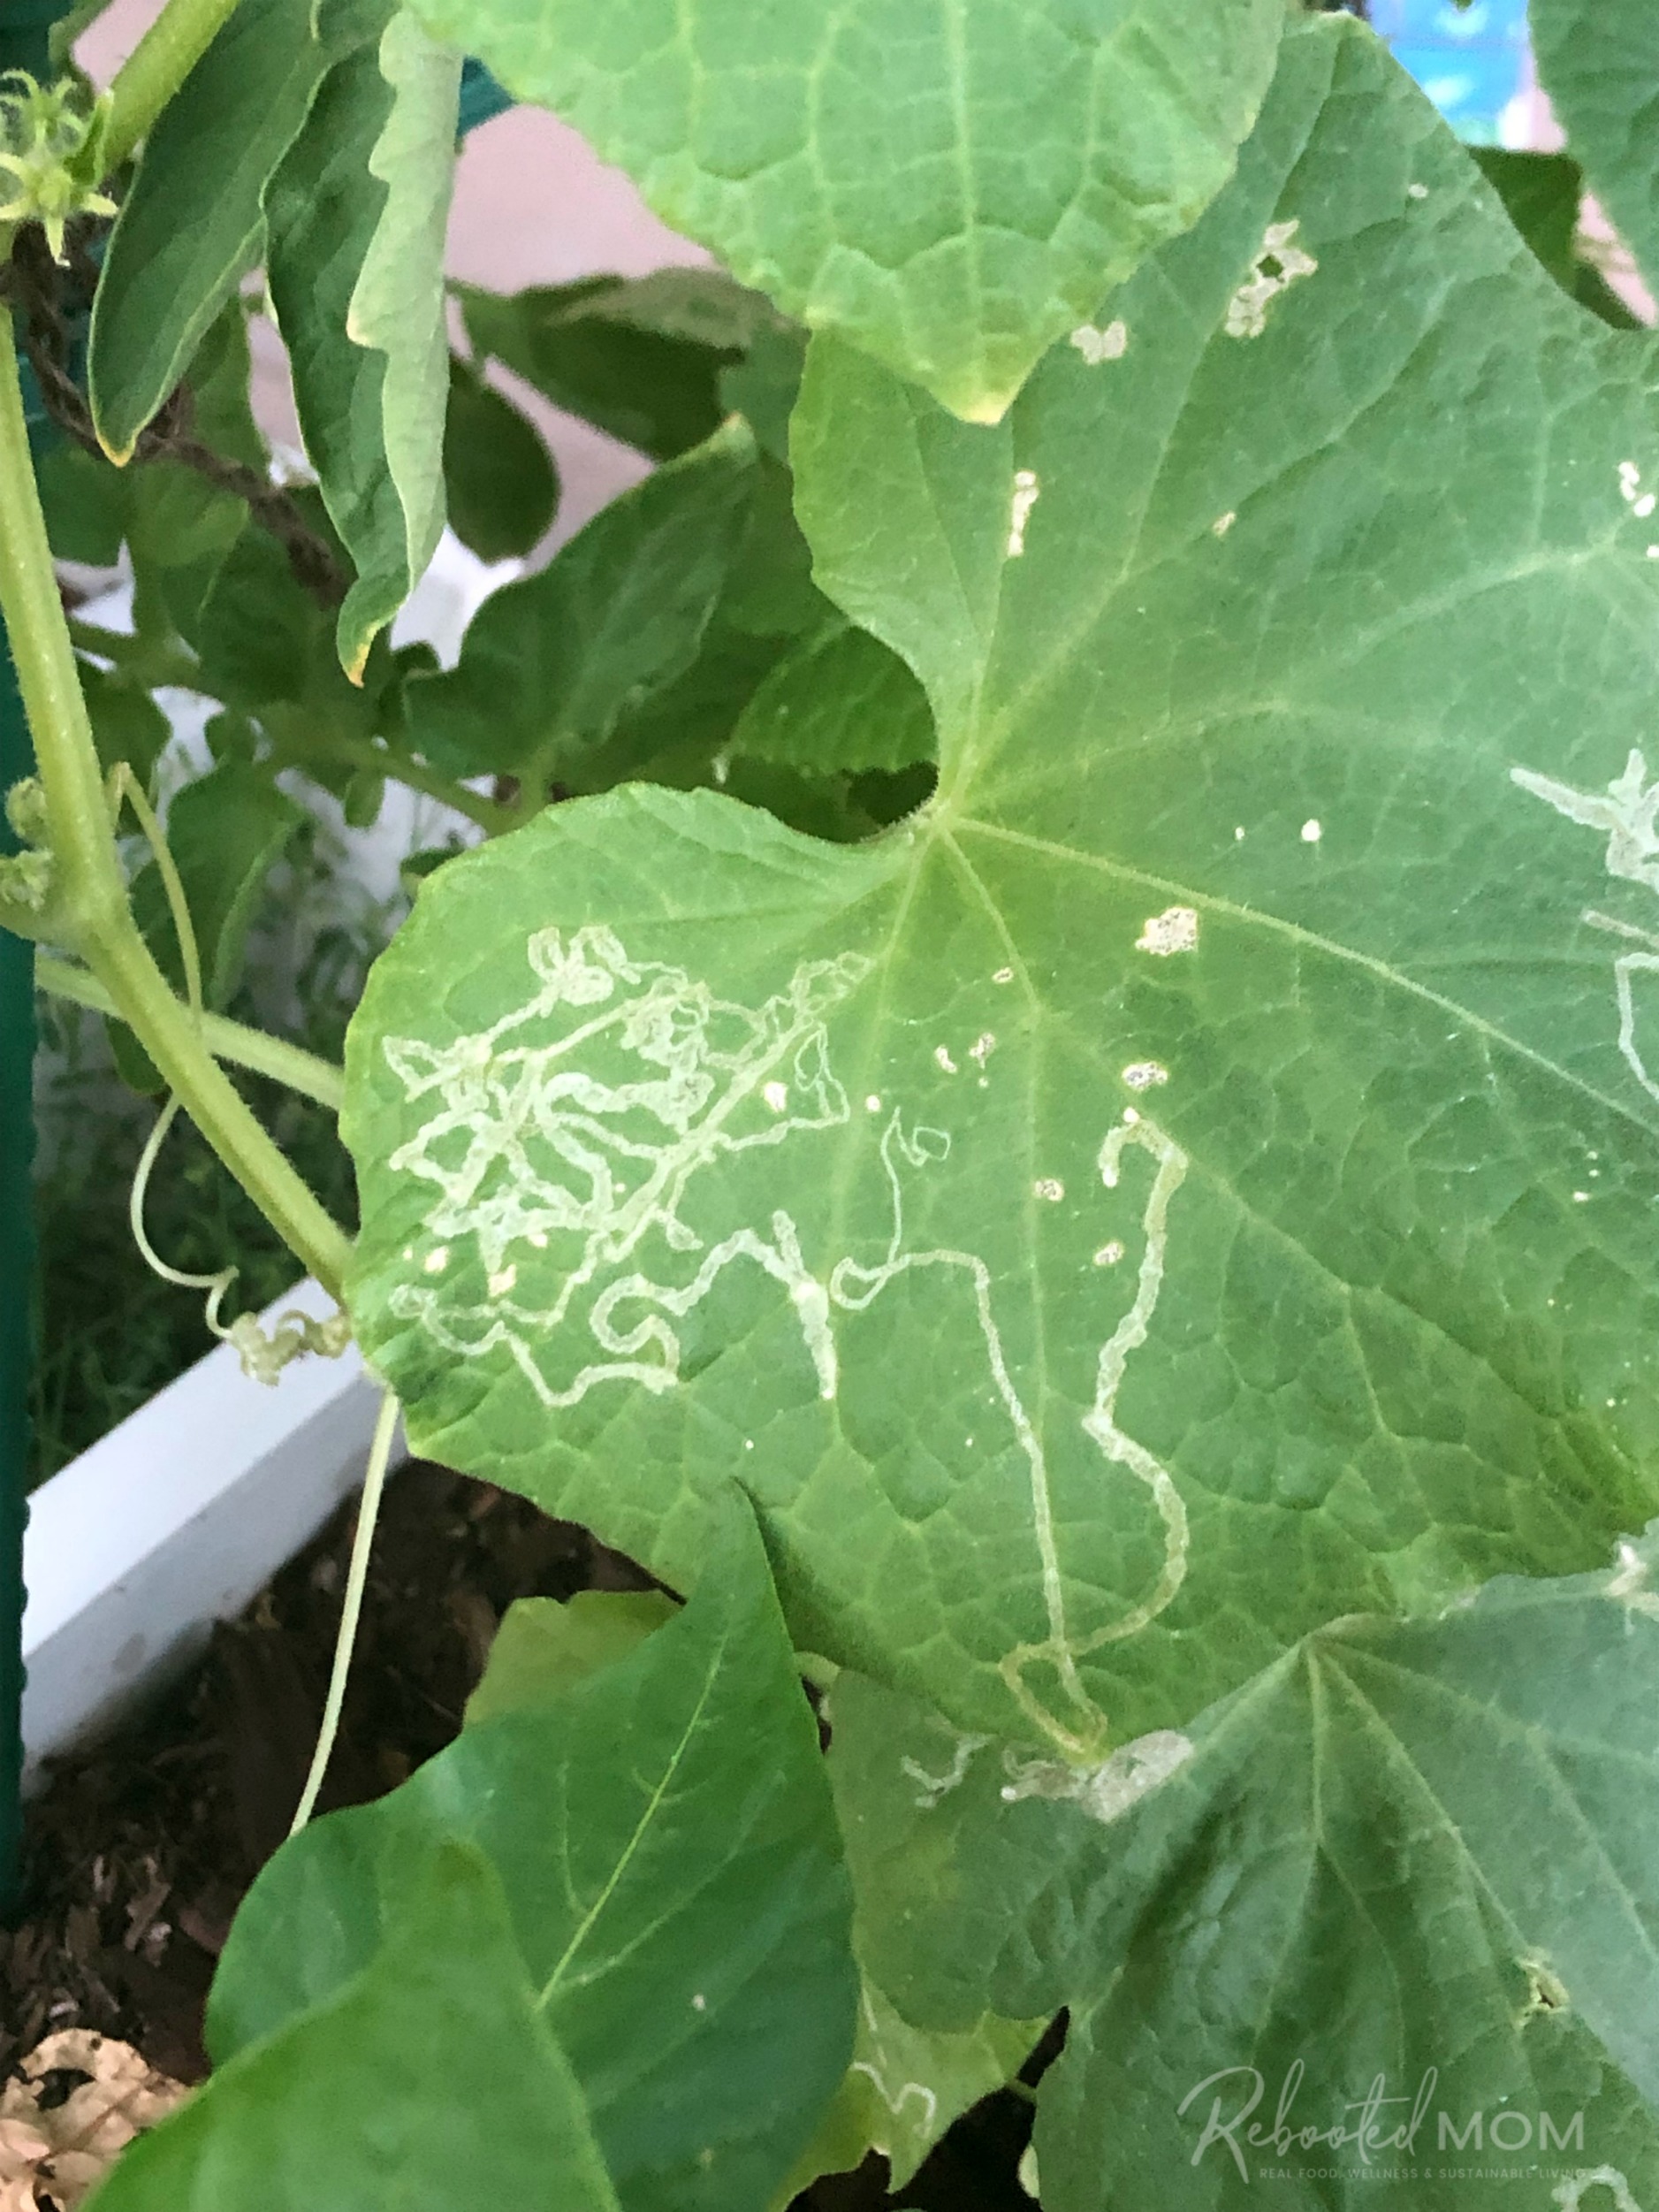 Leafminers on a Cucumber plant